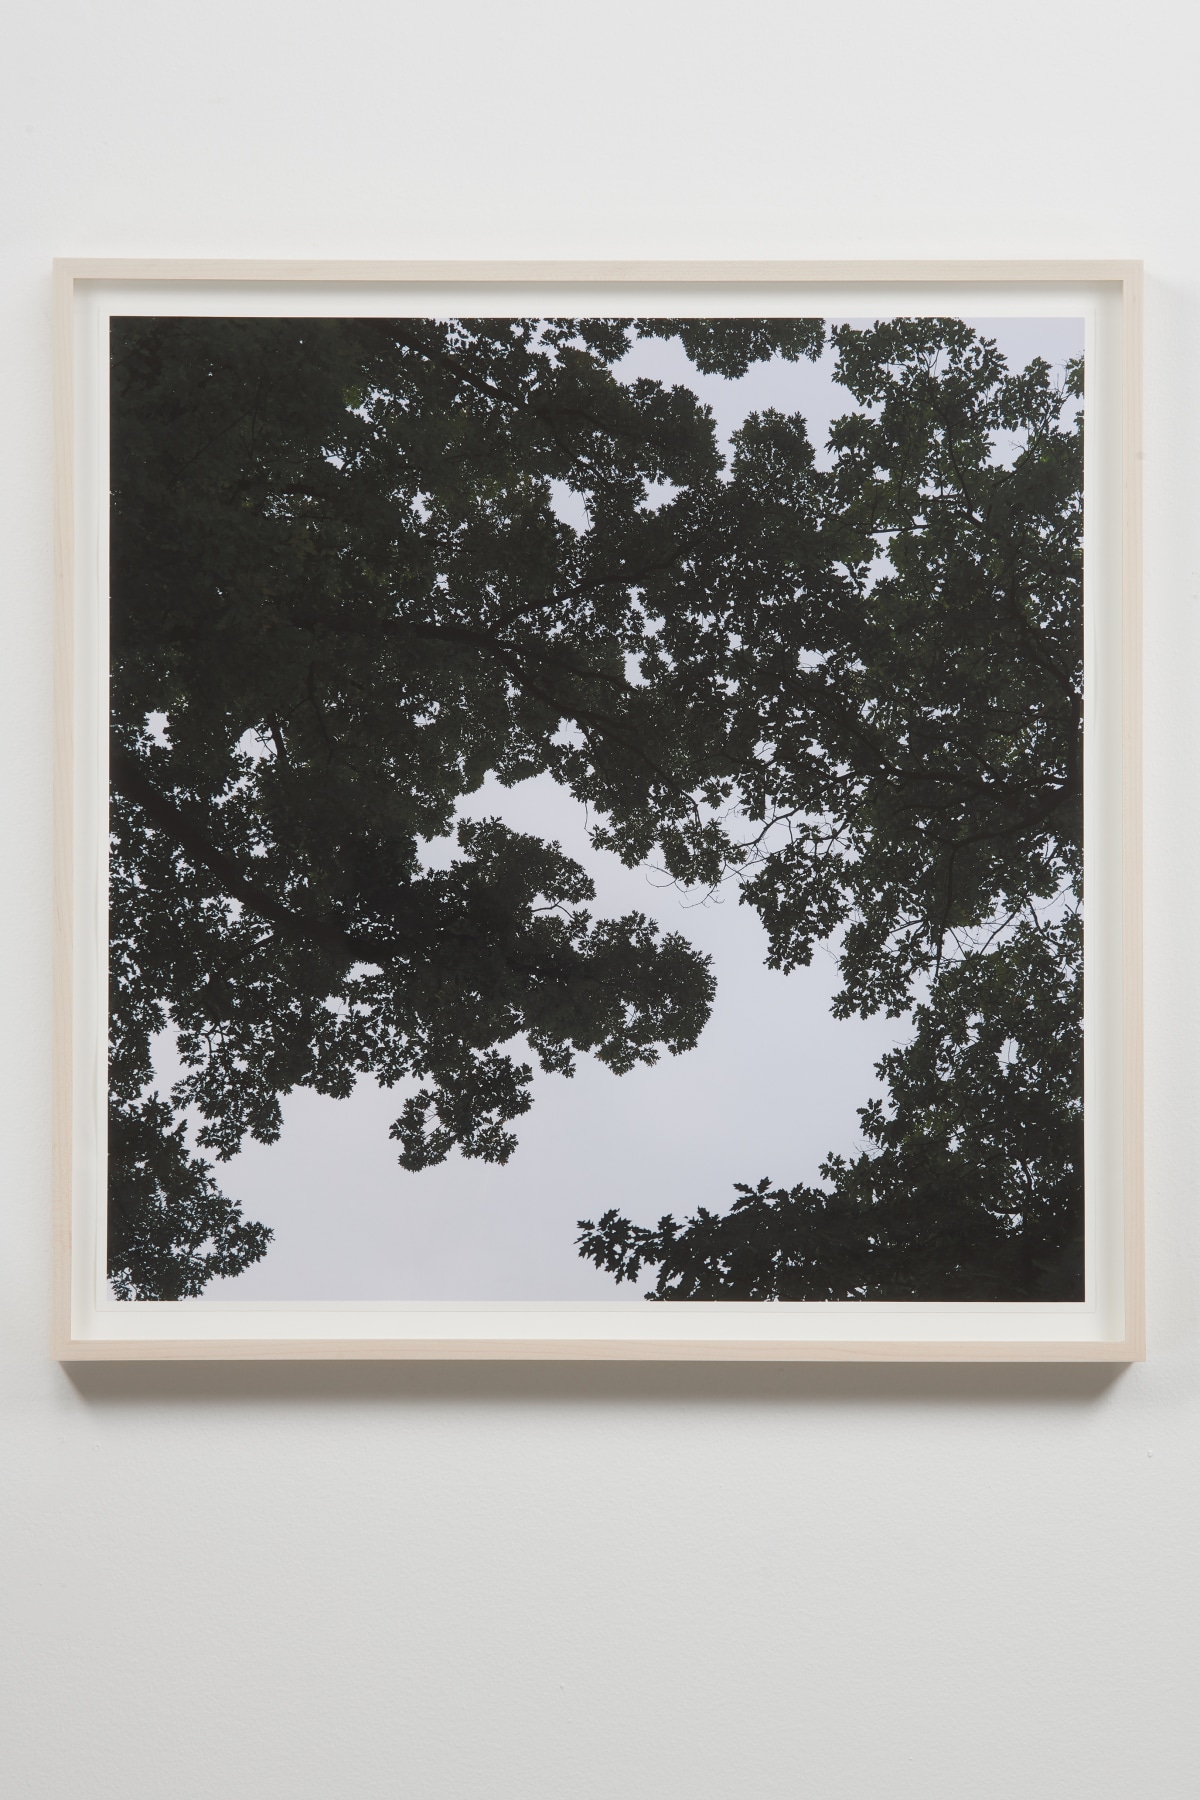 Image of SPENCER FINCH's Oak Tree, Dawn (when two-dimensions become three-dimensions), 2018